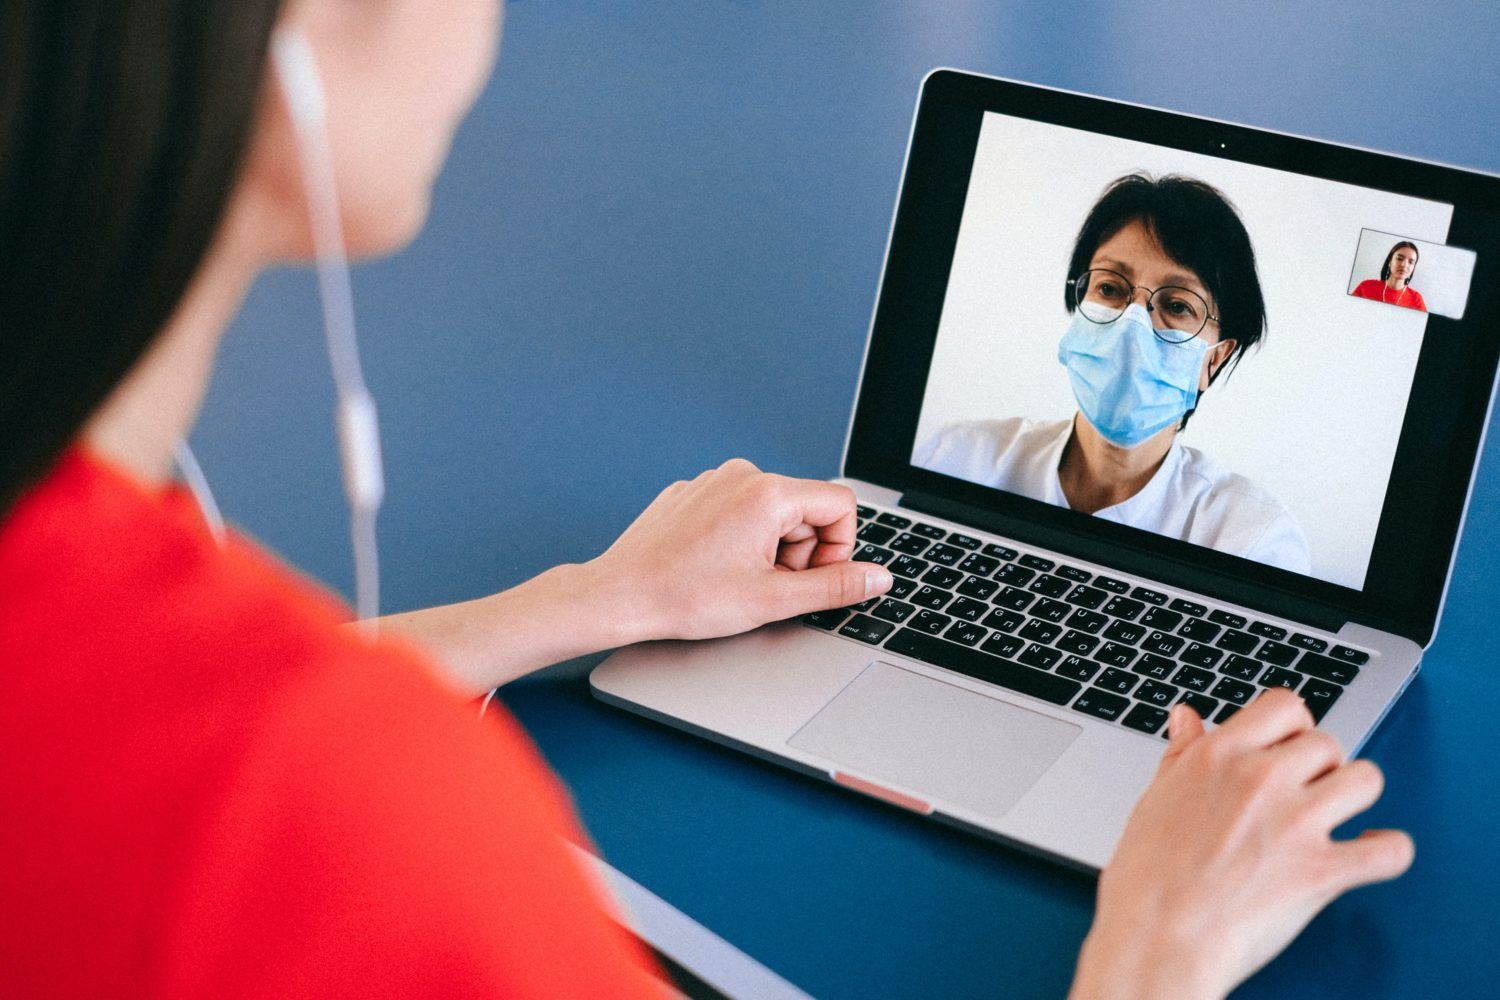 Behavioral Health Services Fueled Telehealth Adoption During Pandemic, Study Finds